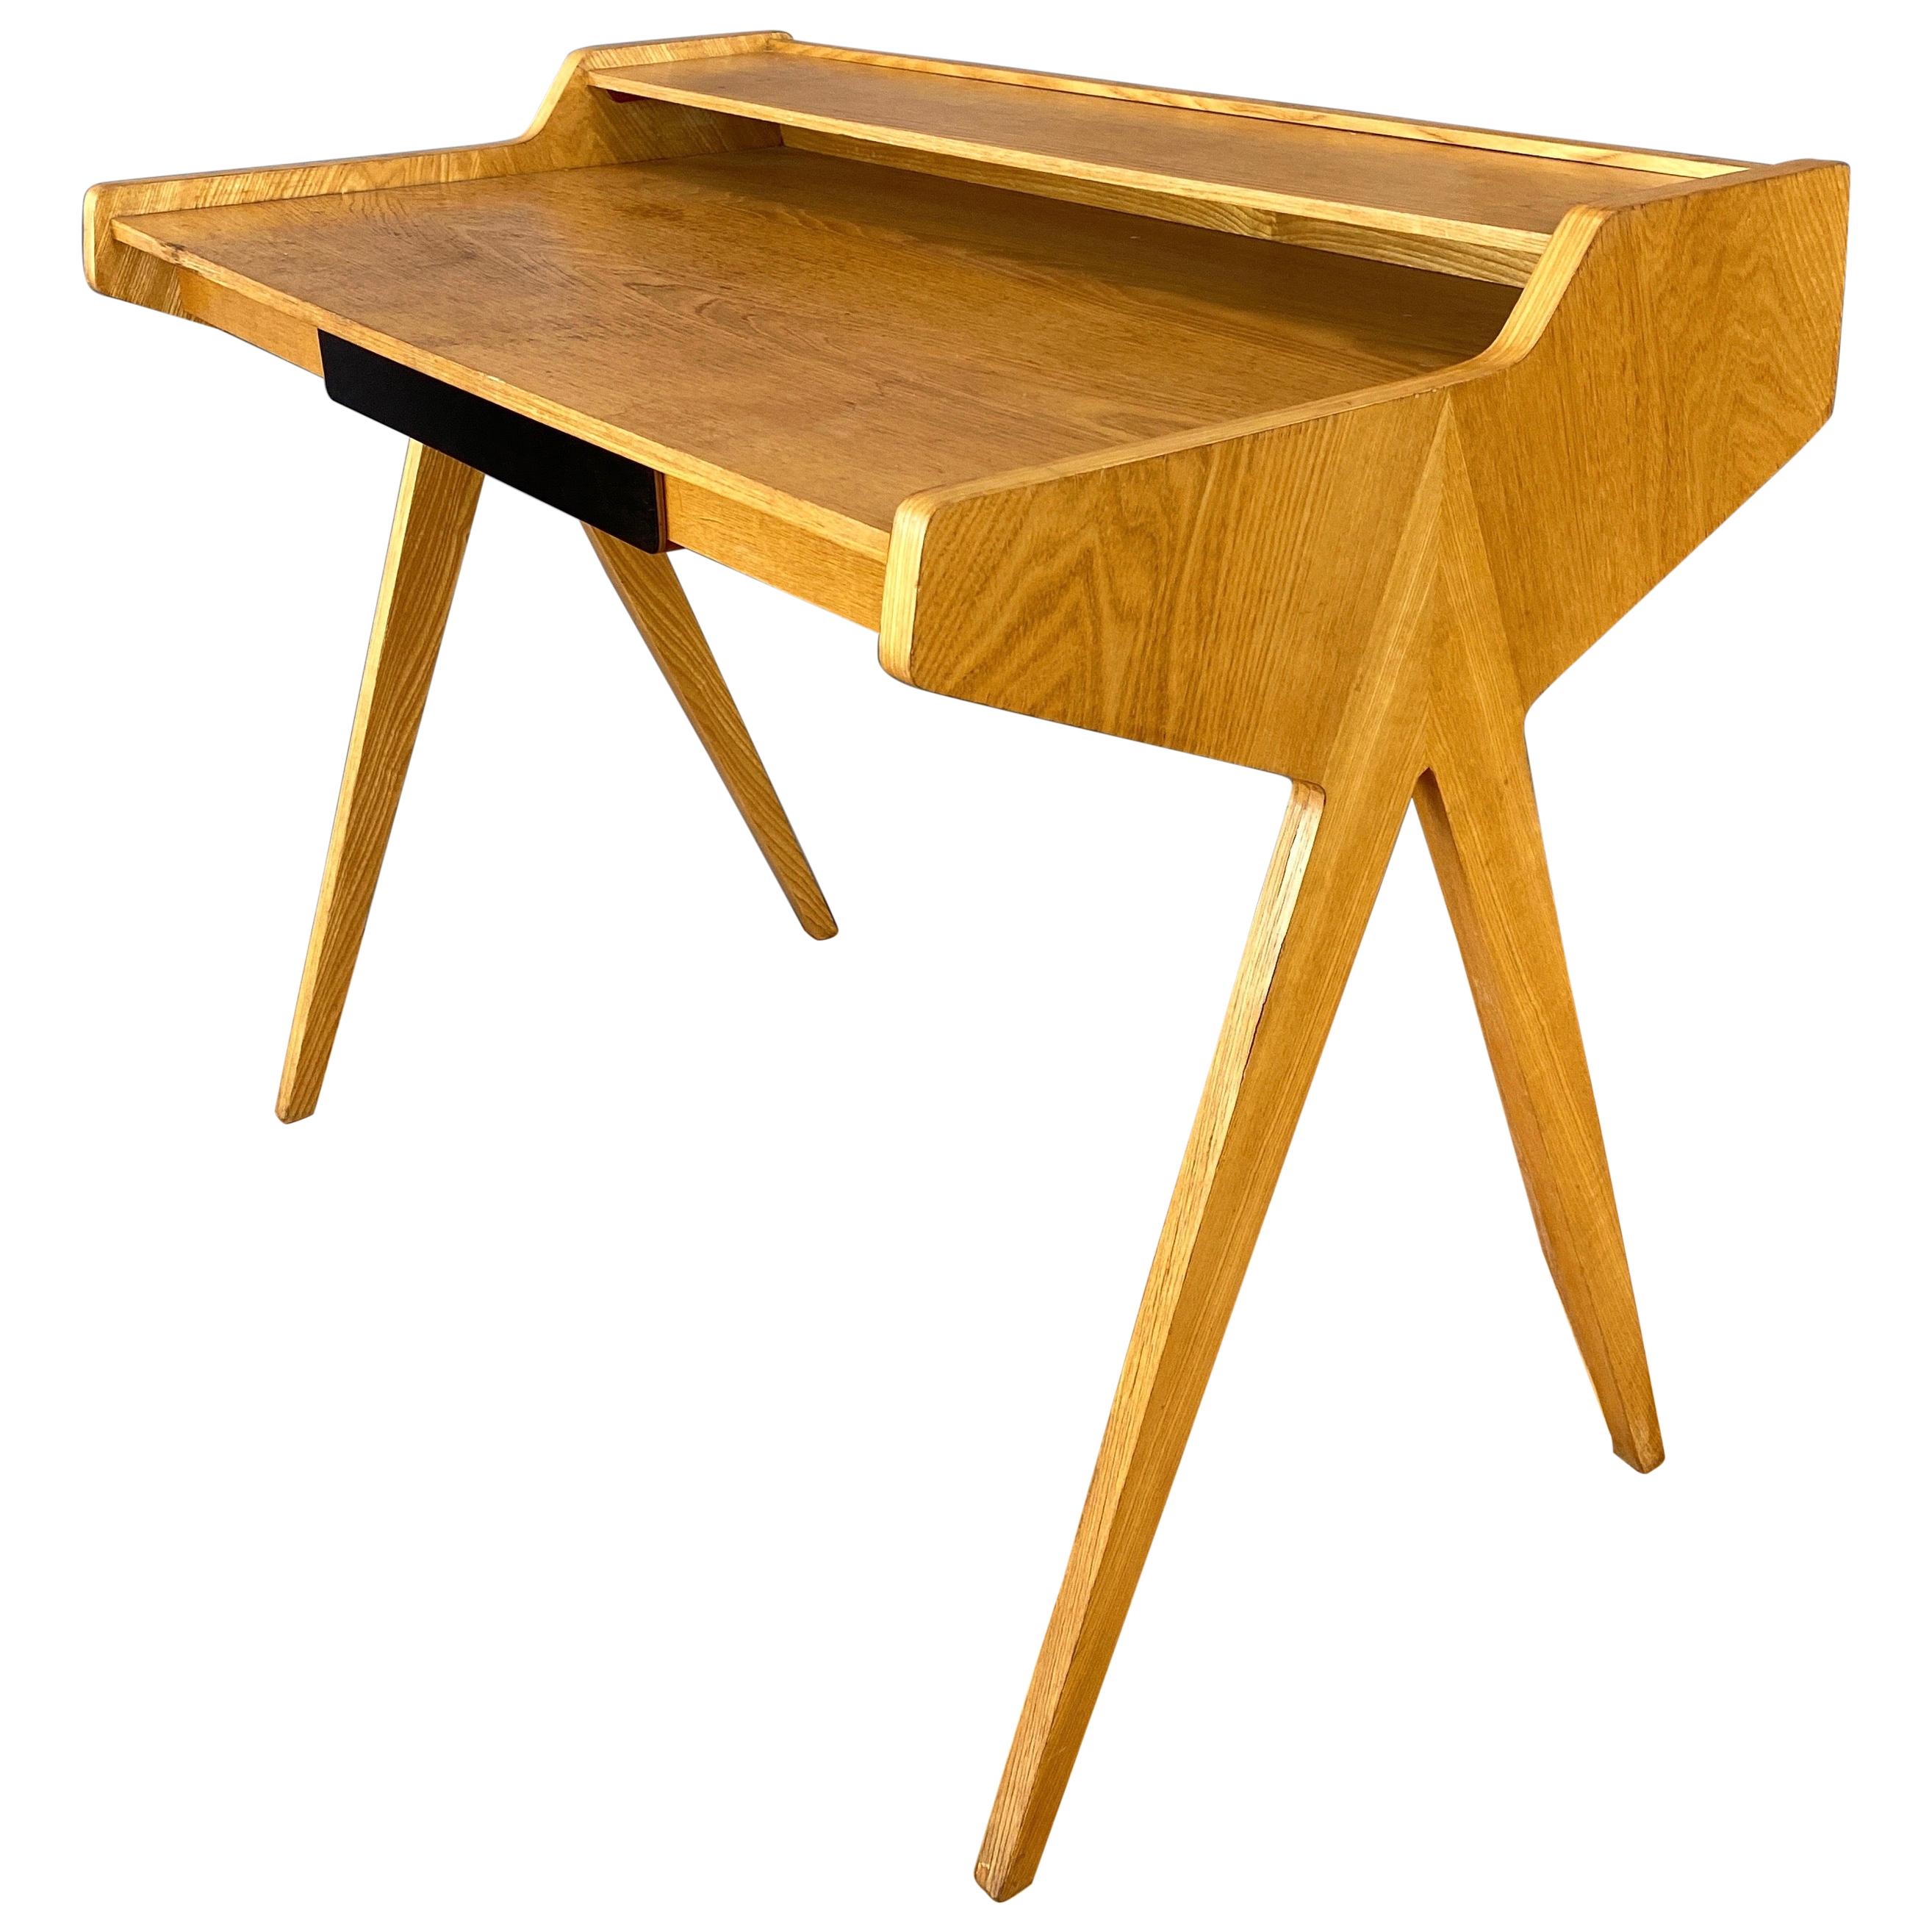 Helmut Magg for WK Möbel Elm Compass Leg Desk with Drawer and Cubby, 1950s